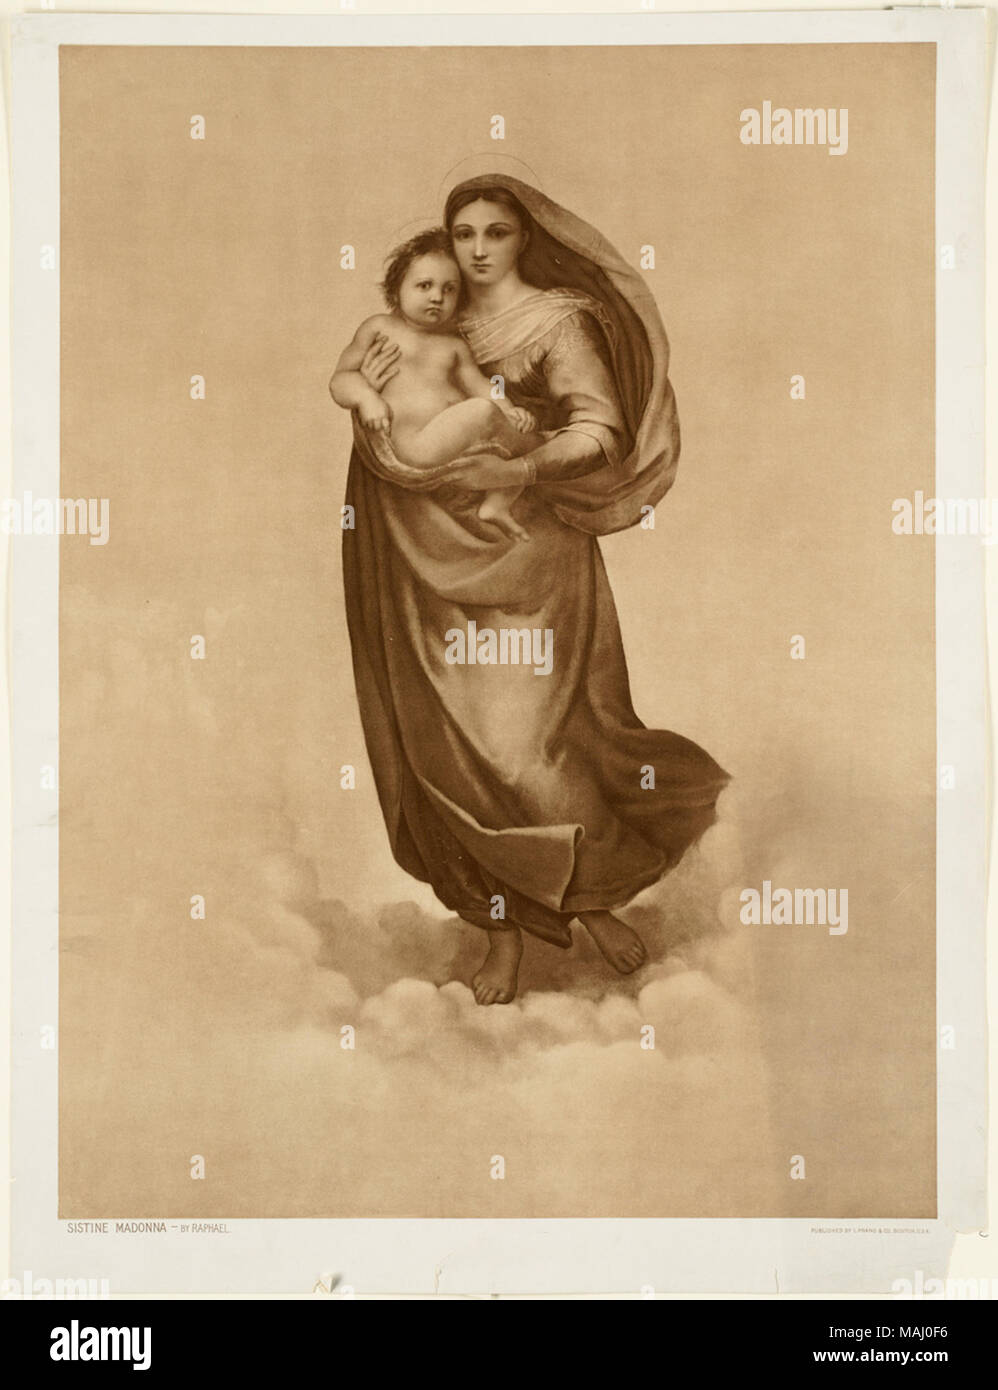 File name: 07 11 001442 Title: Sistine Madonna - Central Figures Only Creator/Contributor: Raphael, 1483-1520 (artist); L. Prang & Co. (publisher) Date issued: 1861-1897 (approximate)  Physical description note: Genre: Chromolithographs; Group portraits; Portrait prints Location: Boston Public Library,    on 2011-08-03: Camera: Sinar AG Sinarback 54 FW, Sinar m Stock Photo